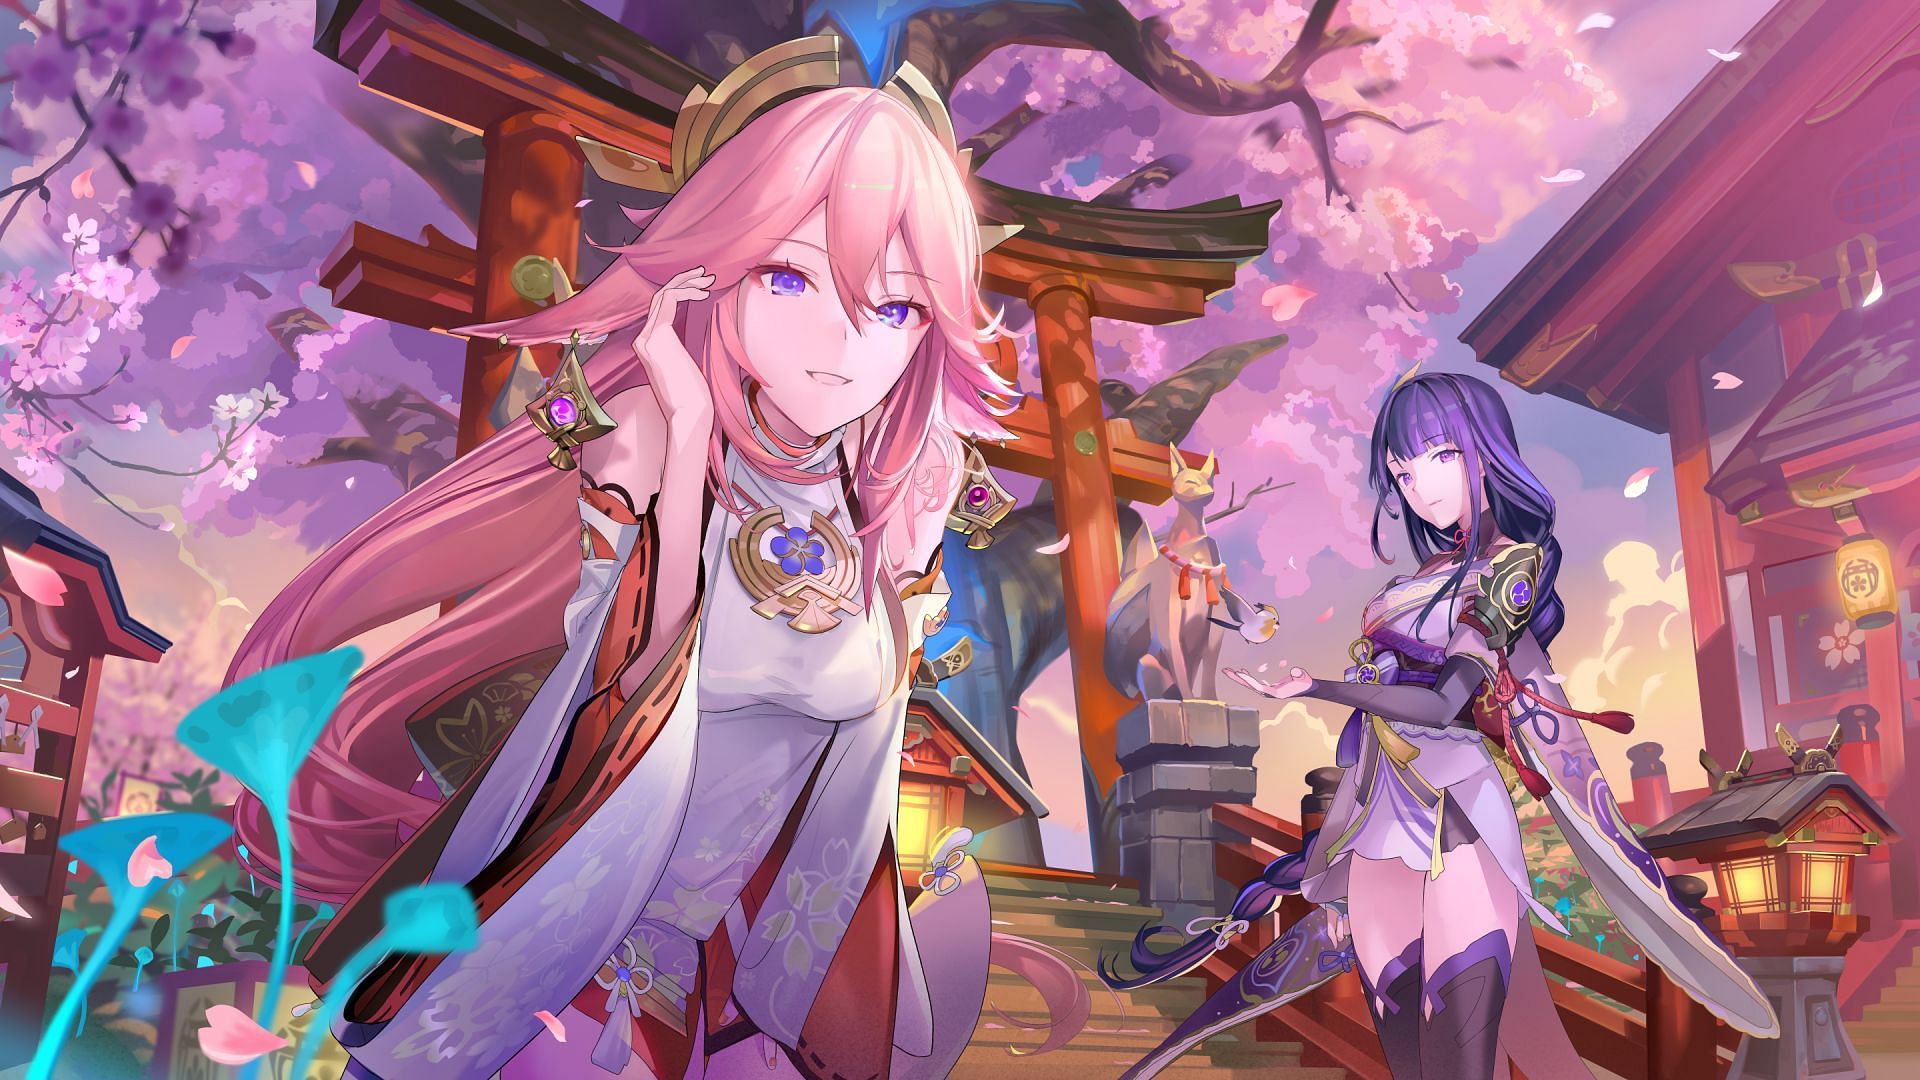 Raiden Shogun and Yae Miko banners are expected to arrive in patch 2.5 (Image via Wallpaper Abyss)